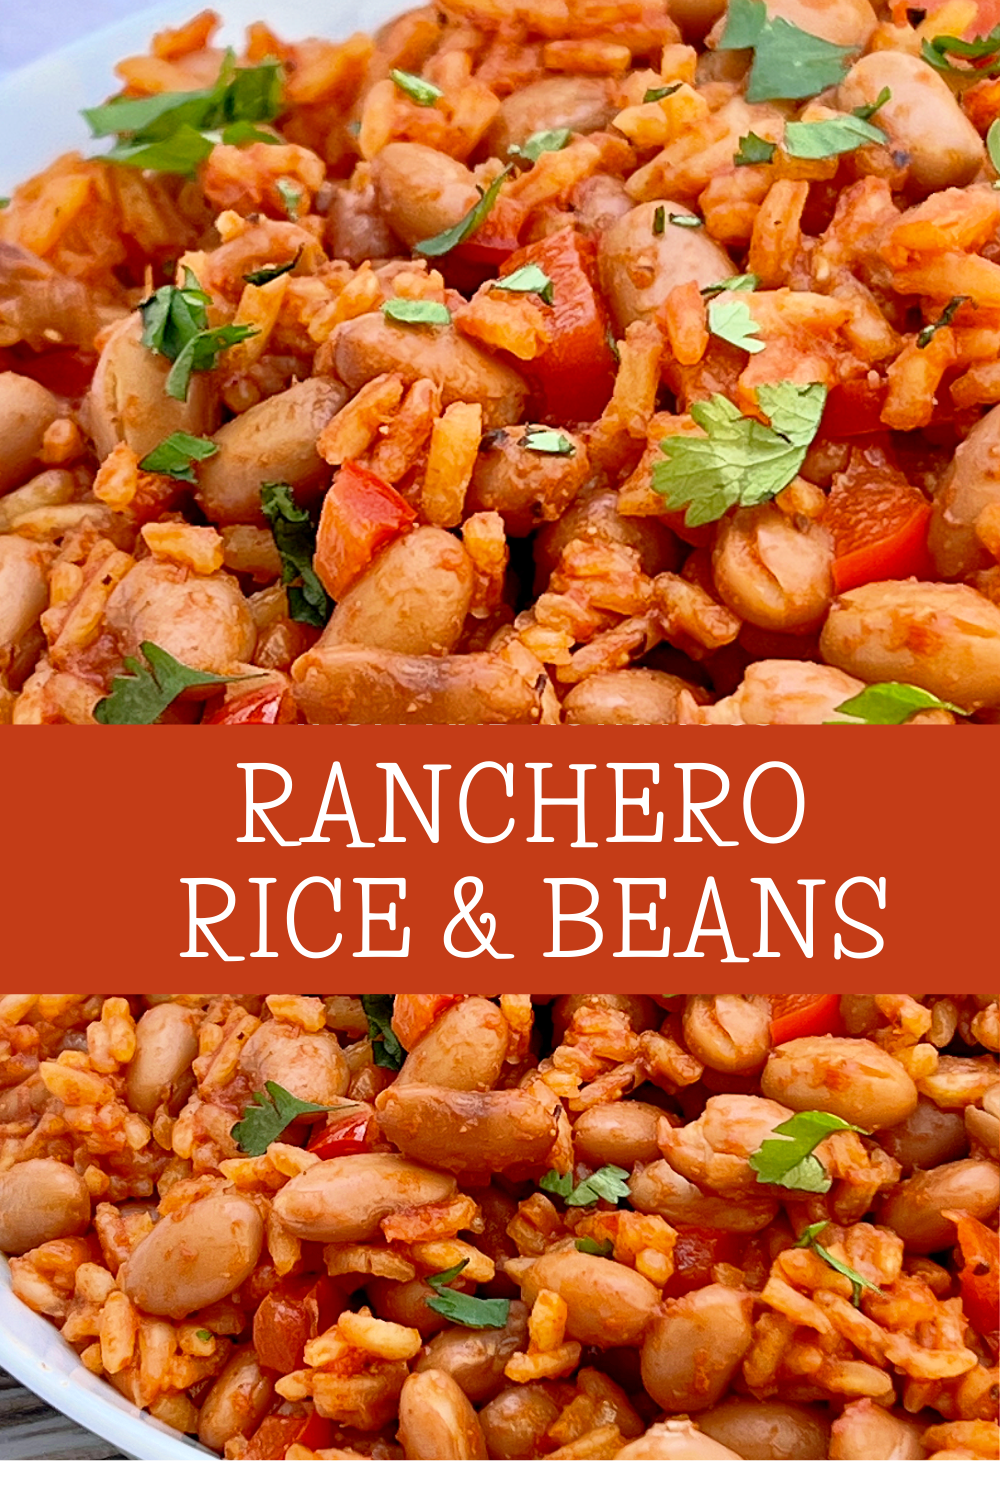 Ranchero Rice and Beans ~ Authentic South of the border flavor in an easy-to-make one-pot dinner!  via @thiswifecooks